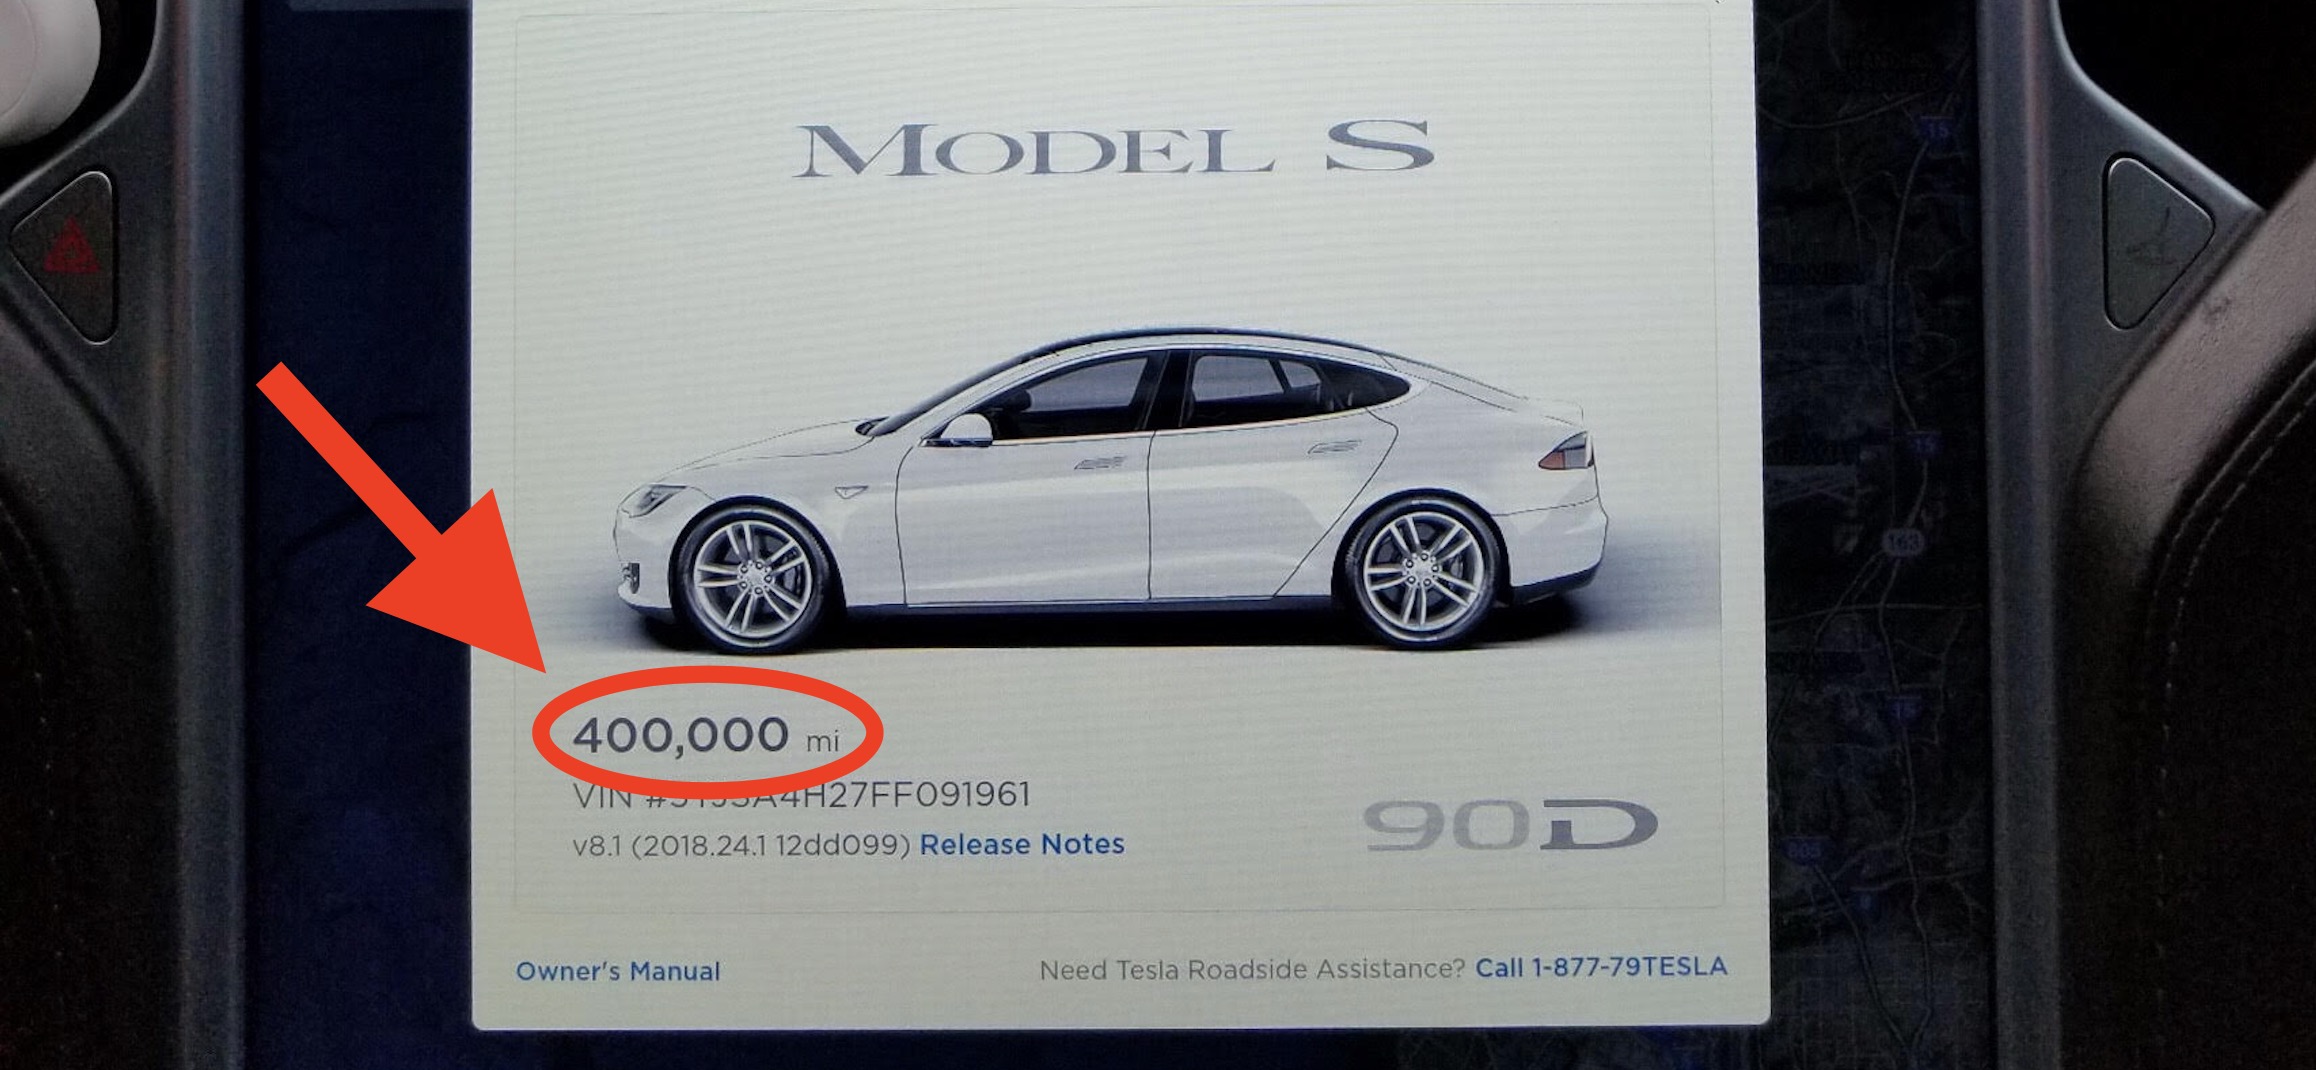 How much is a battery for a tesla model s Battery Expert Tesla Model 3 Has Most Advanced Large Scale Lithium B Evannex Aftermarket Tesla Accessories